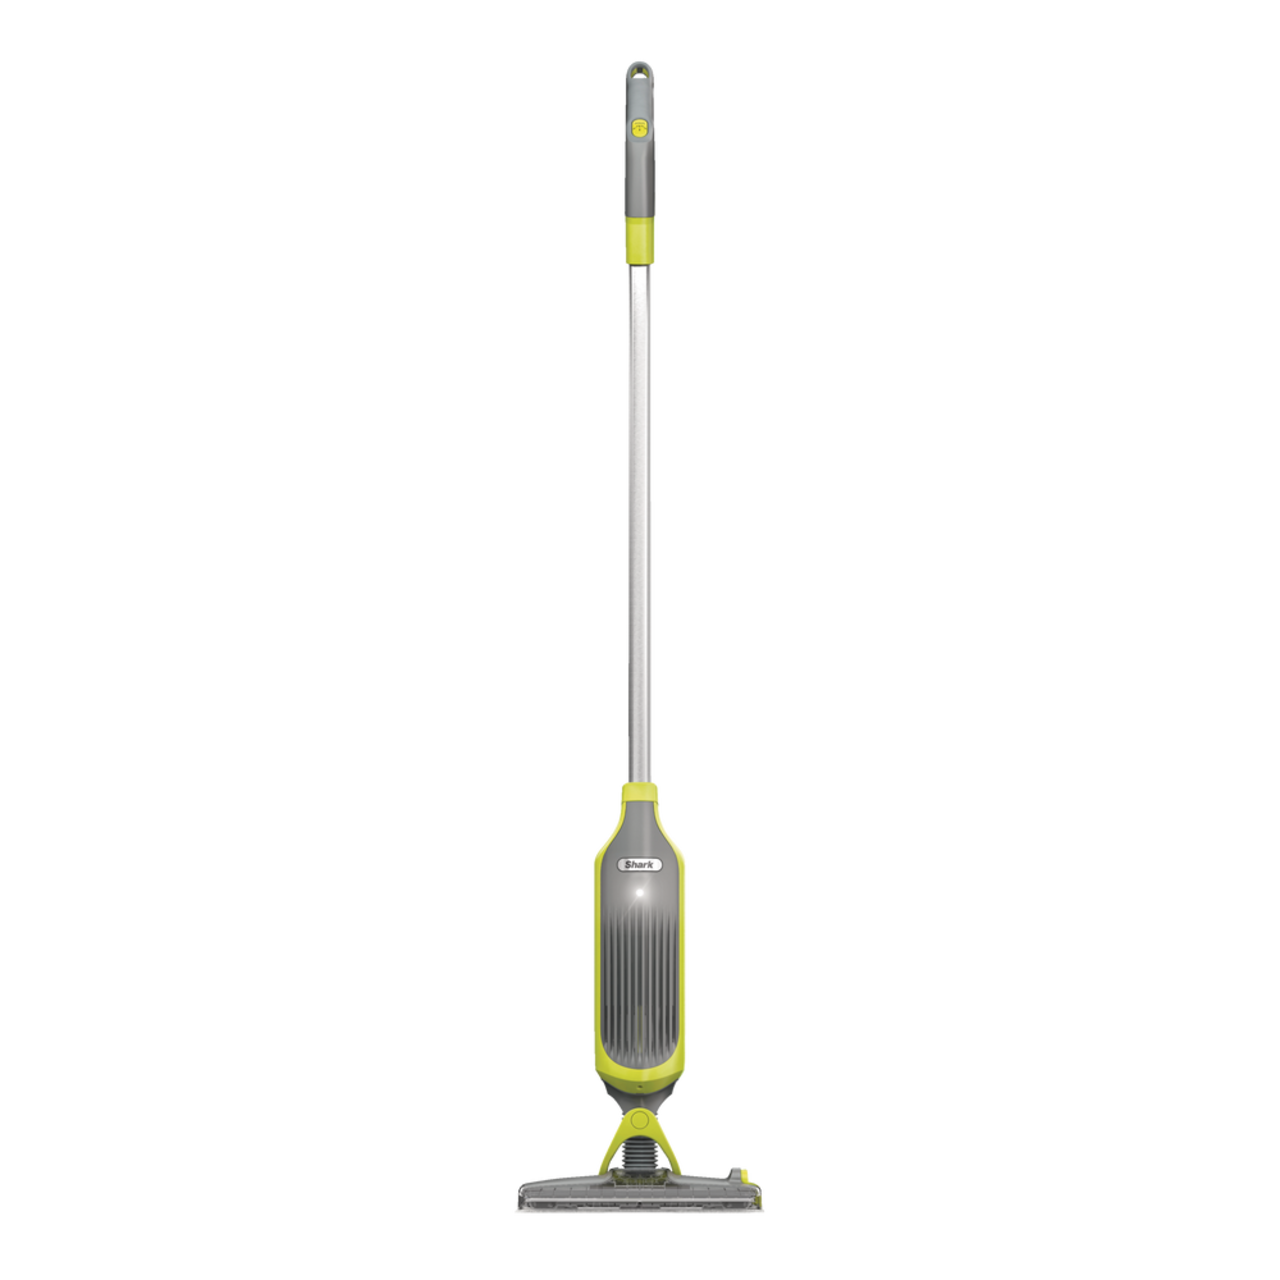 https://media-www.canadiantire.ca/product/living/cleaning/household-cleaning-tools/1426188/vacmop-starter-kit-cfd6d0c3-74b9-4ddb-b3d0-009f4aabb657.png?imdensity=1&imwidth=640&impolicy=mZoom